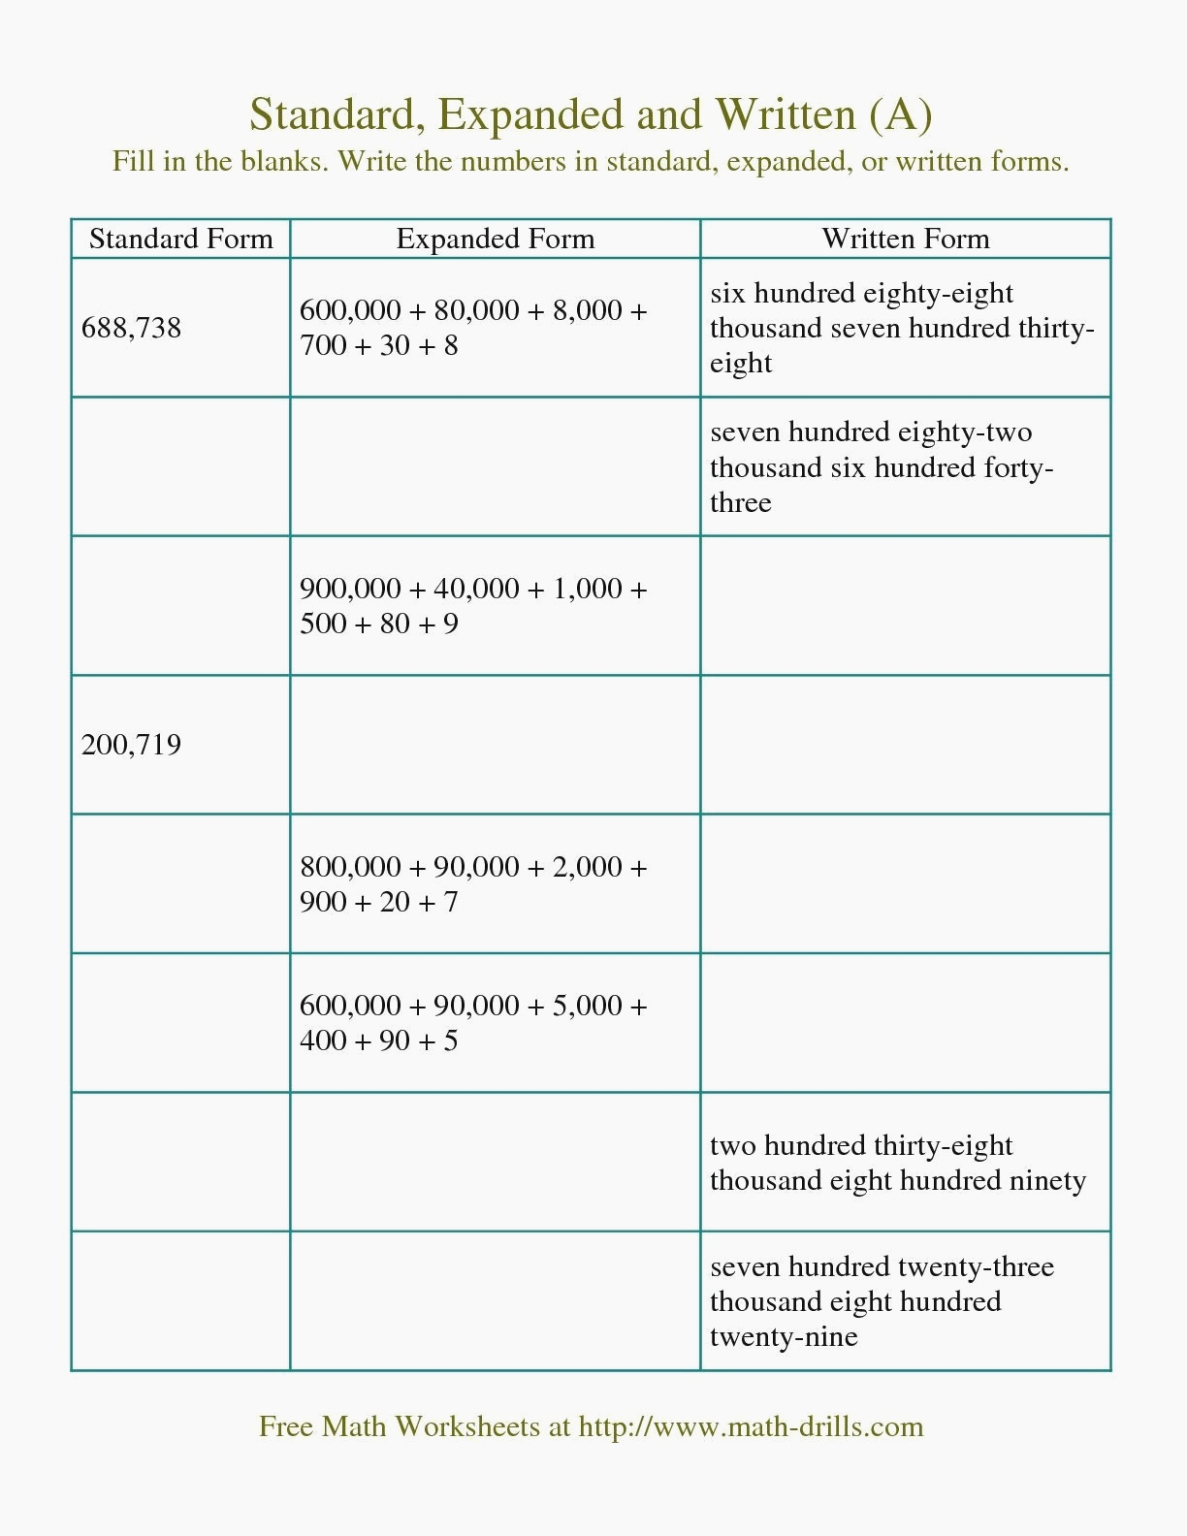 Word form Worksheets 4th Grade Luxury Standard form Math 14th